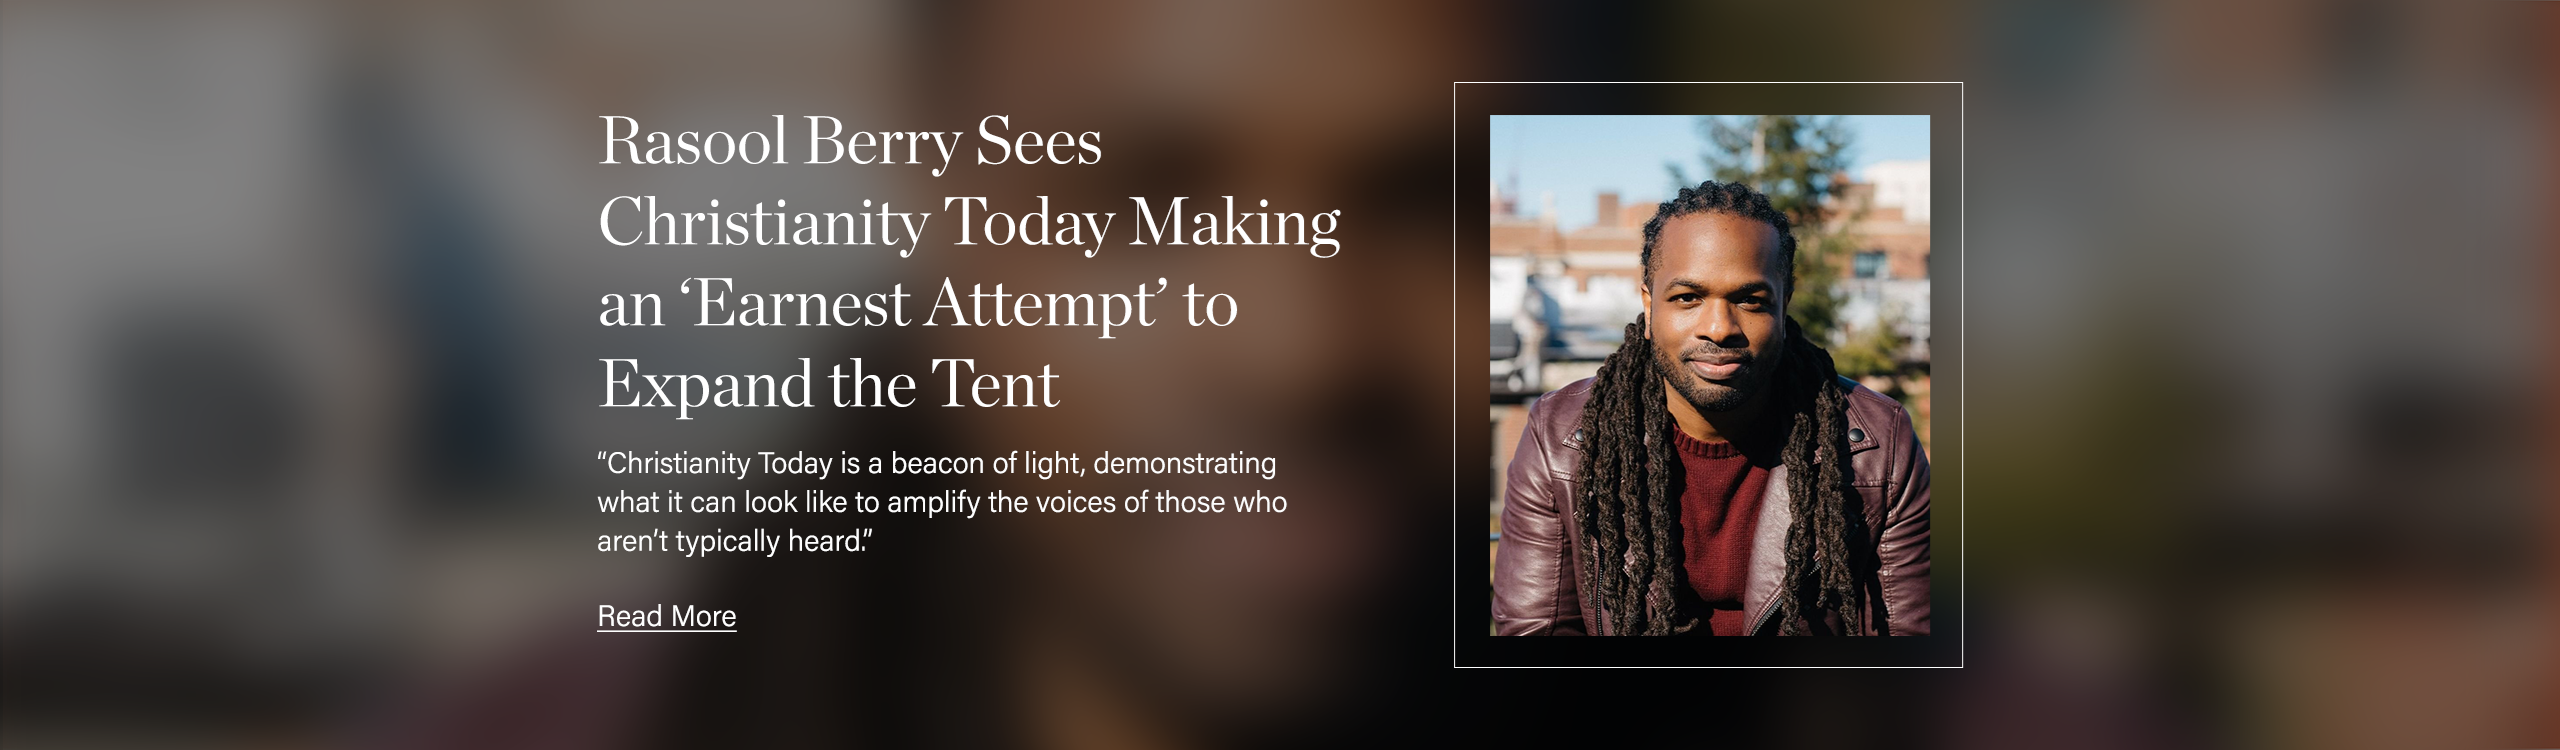 Rasool Berry Sees Christianity Today Making an ‘Earnest Attempt’ to Expand the Tent: “Christianity Today is a beacon of light, demonstrating what it can look like to amplify the voices of those who aren’t typically heard.” 